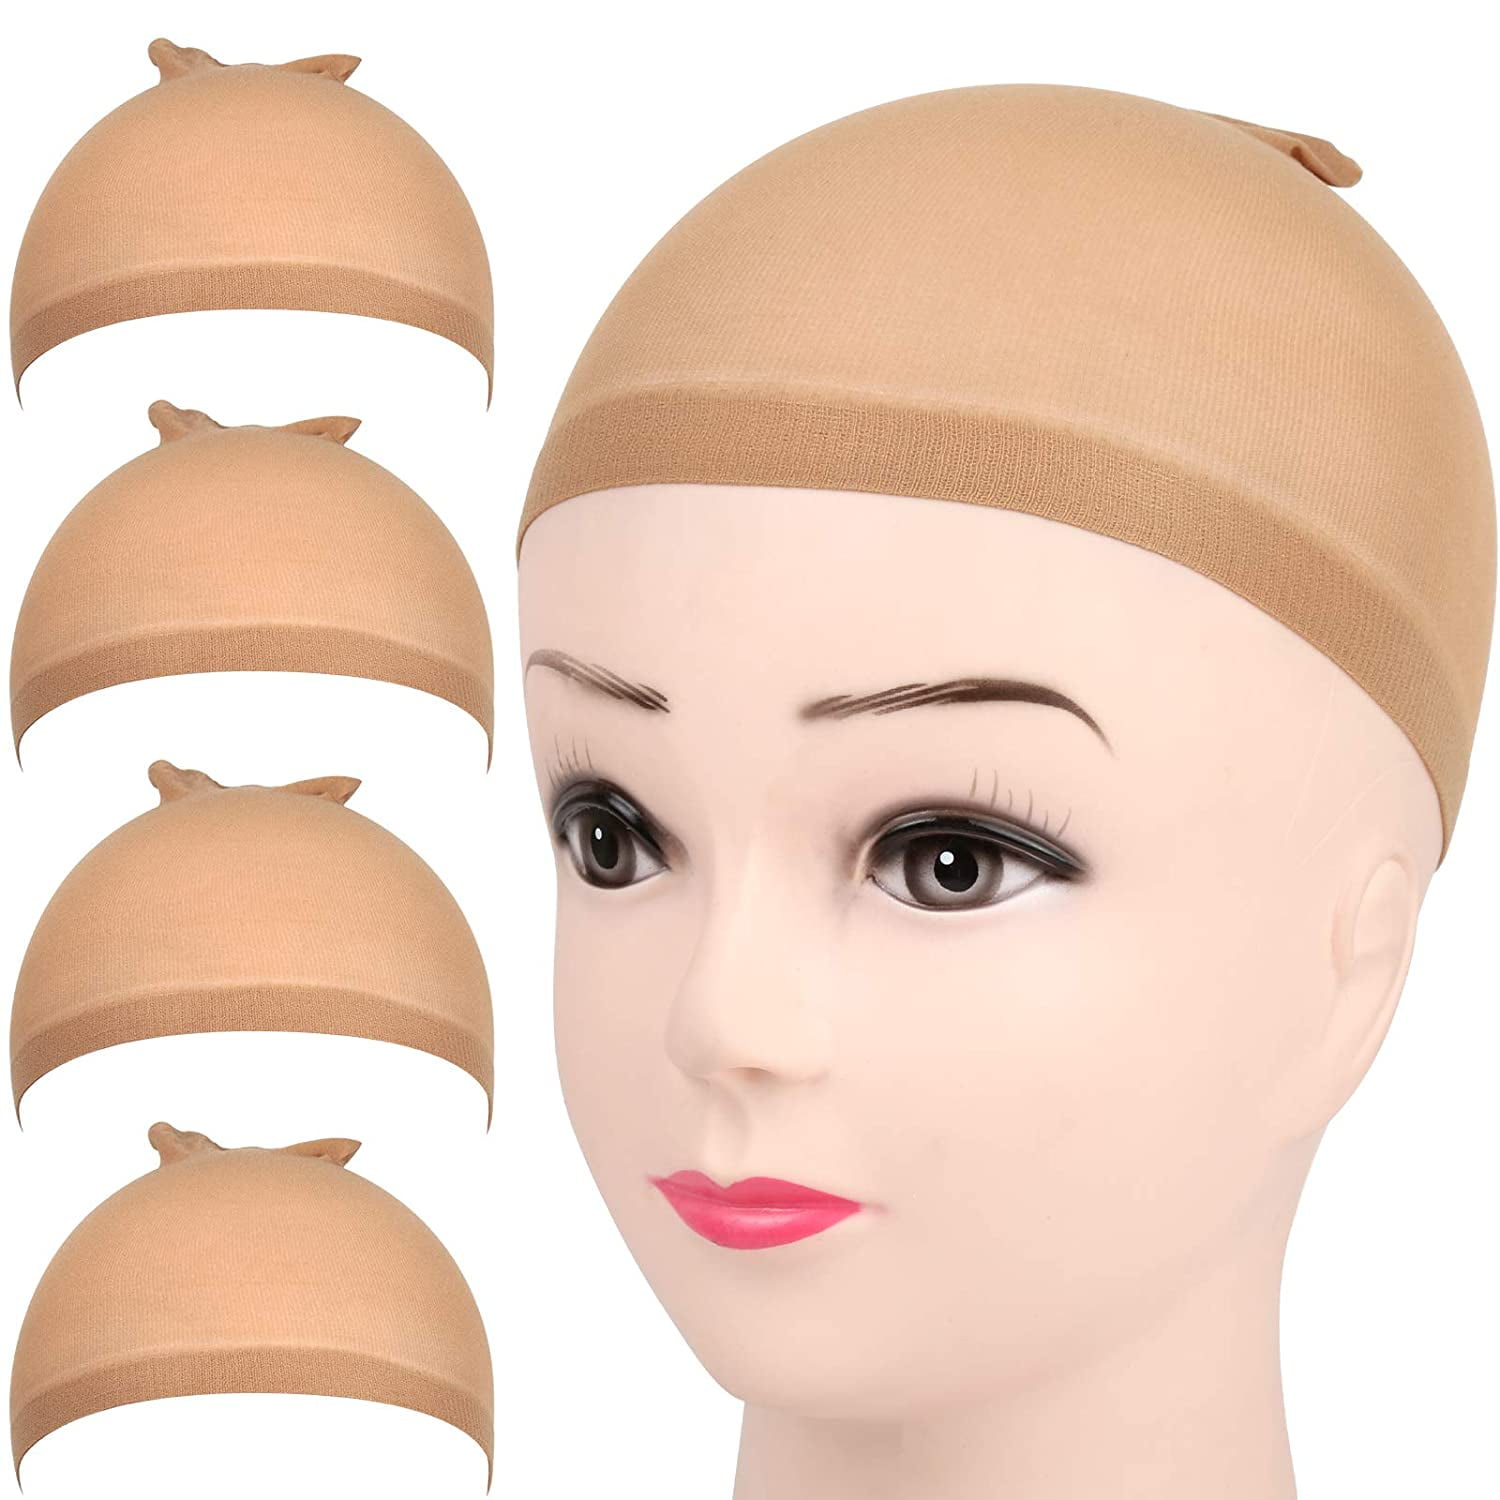 under cap for wig in black nylon color nice and thin